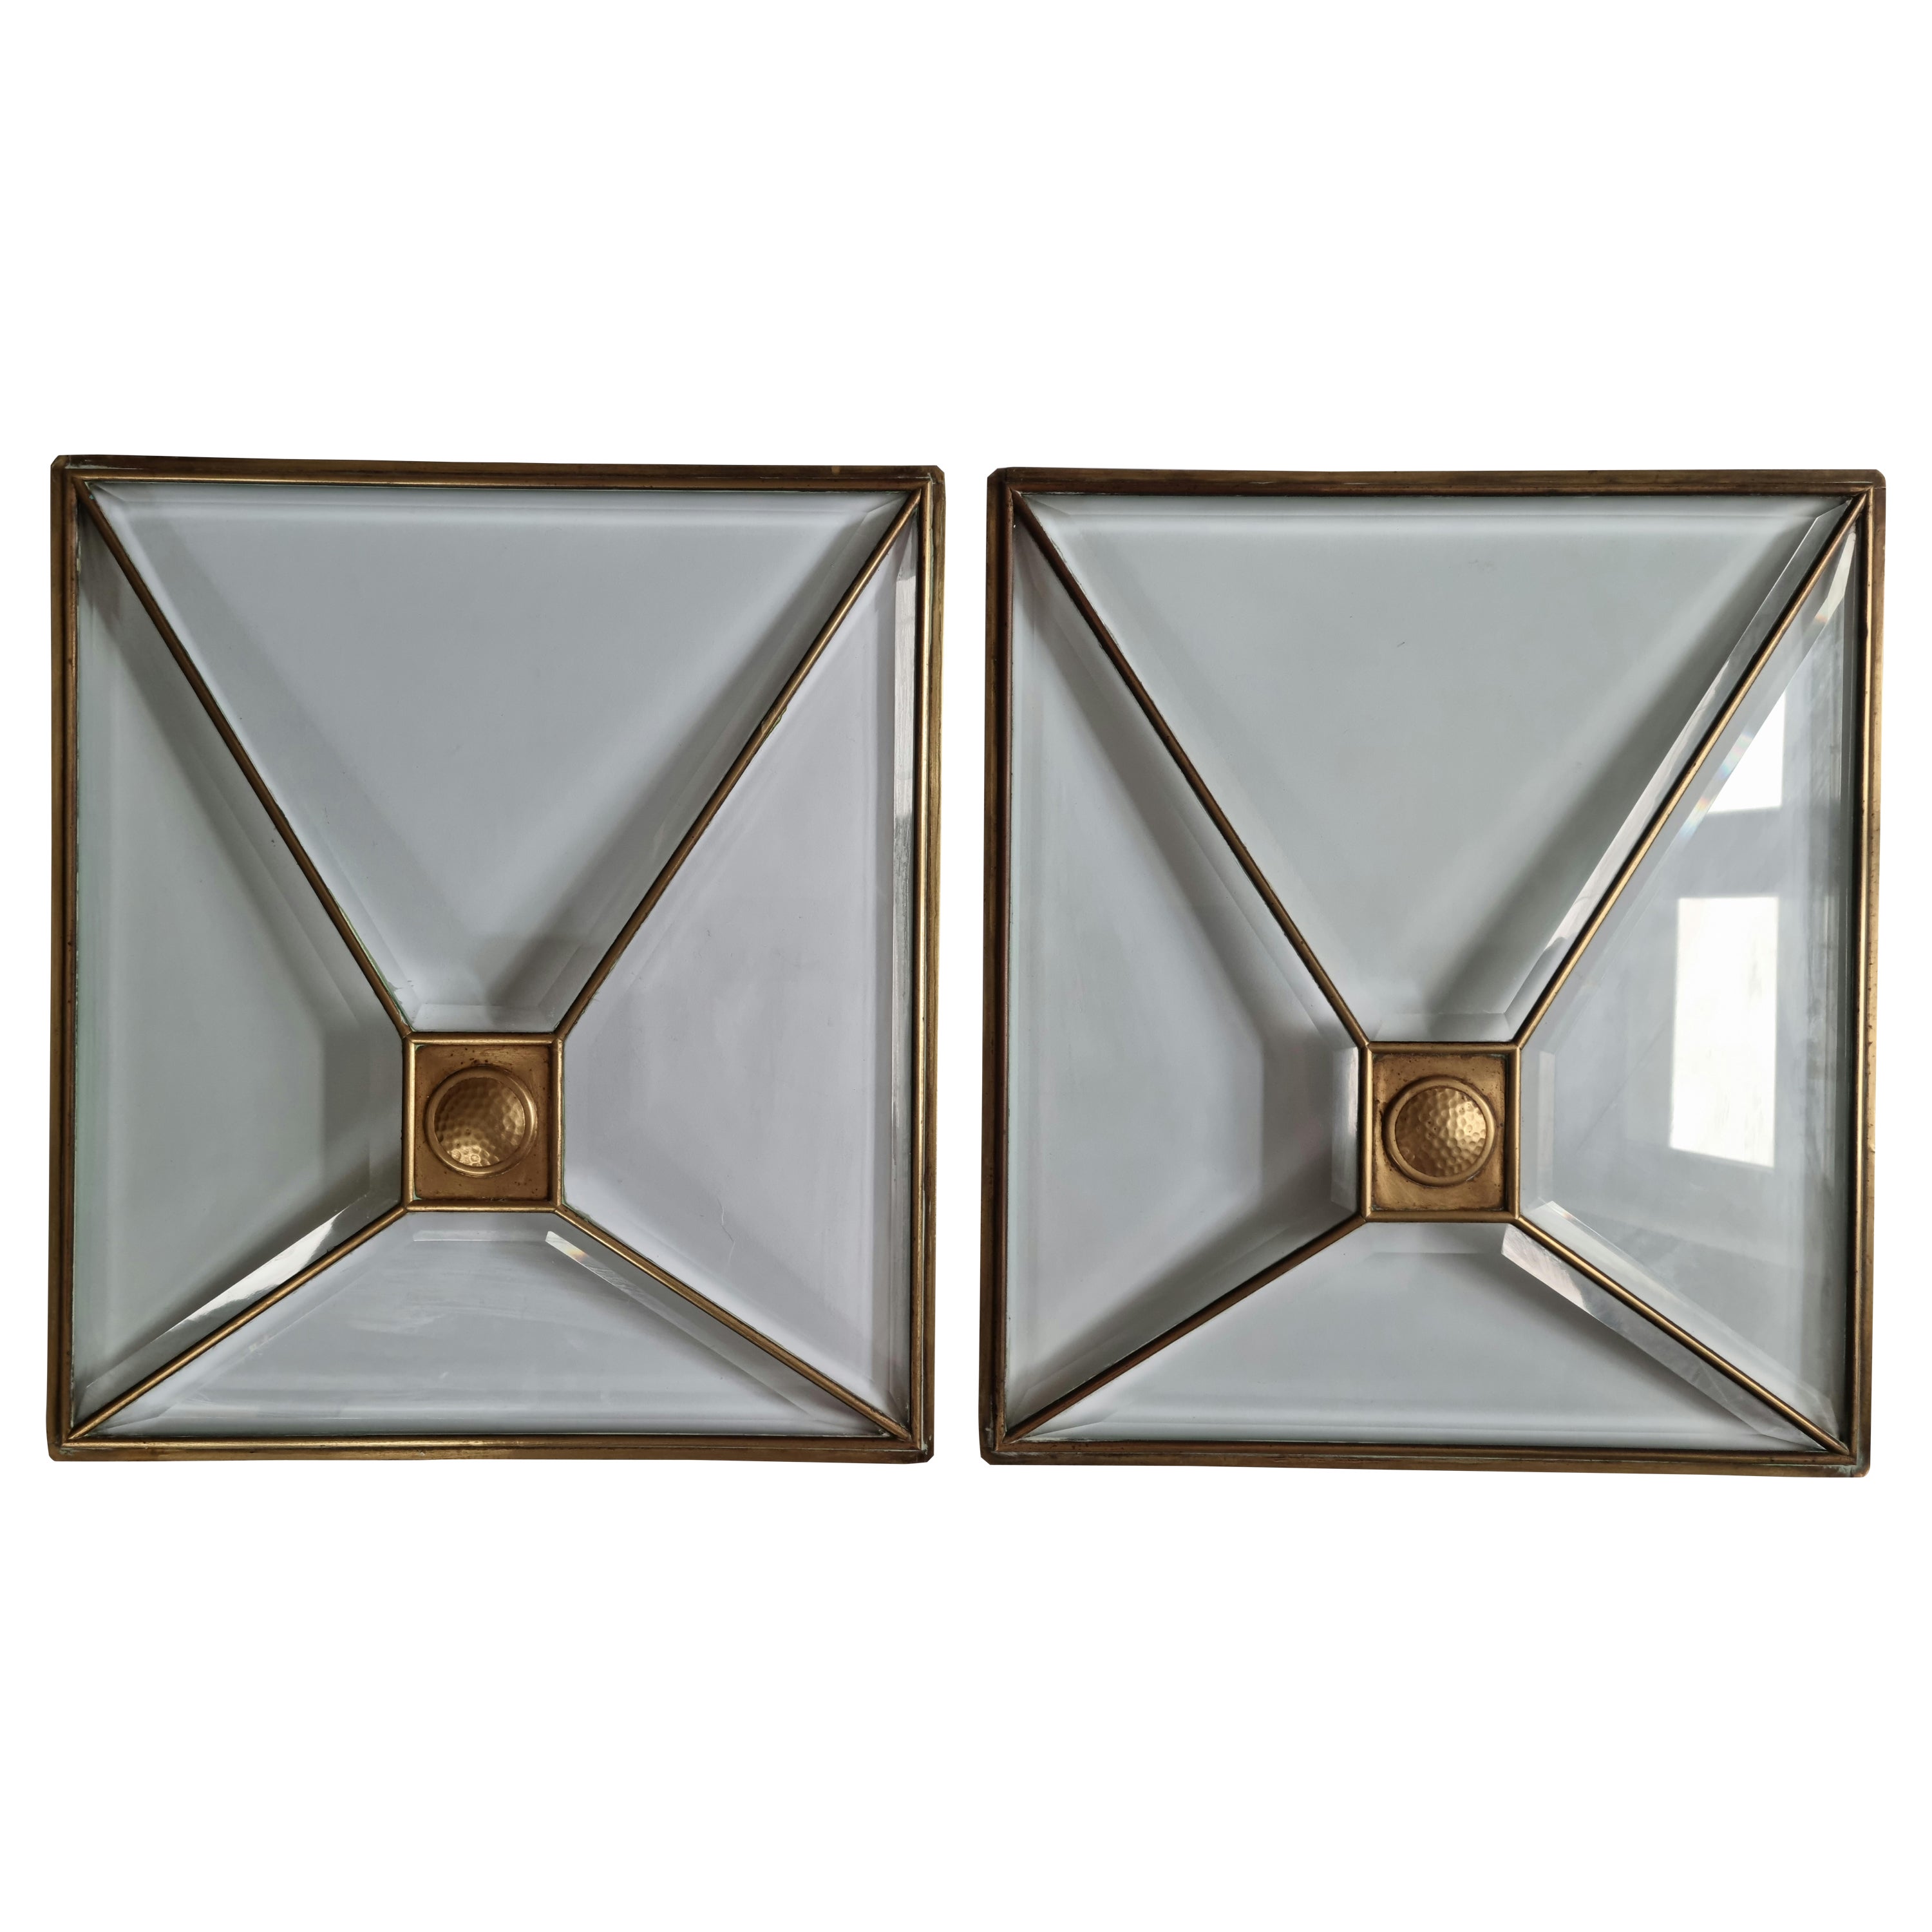 Set of Two Rare Art Deco Windows, Faceted Glass and Brass, Austria, 1930s